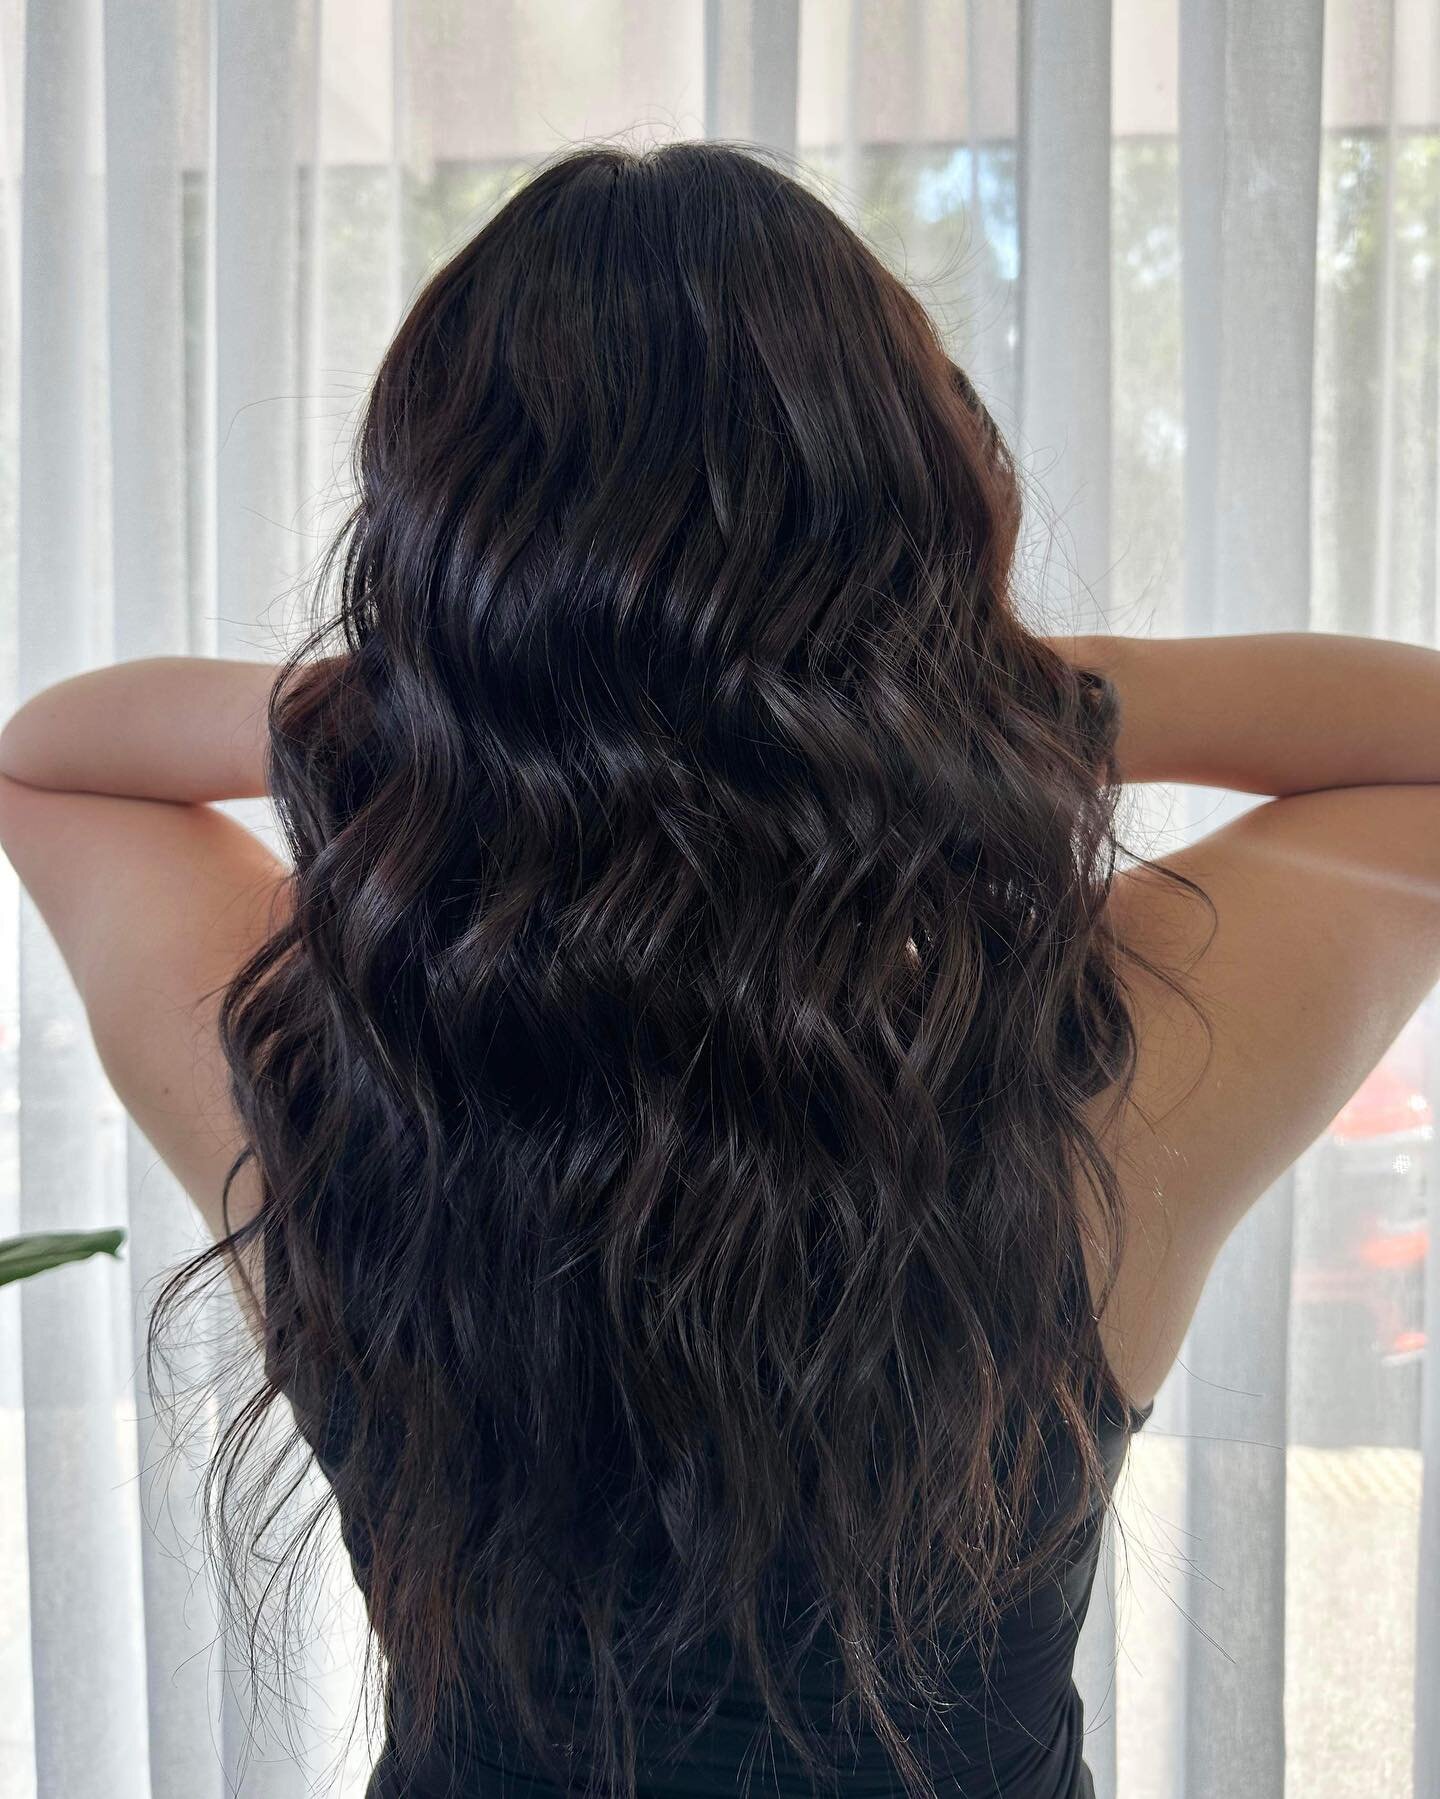 ISSA LOOK &hearts;

Service - brunette package
Stylist - @mads_thehare.boutique 

📍Shop D, 6 Dutton Street Walkerston Q 4751
📱07 4857 5109 or text 0473 836 974
(Located at the Woolworths complex beside Raw Fitness gym).

#mackaysalon #walkerstonsal